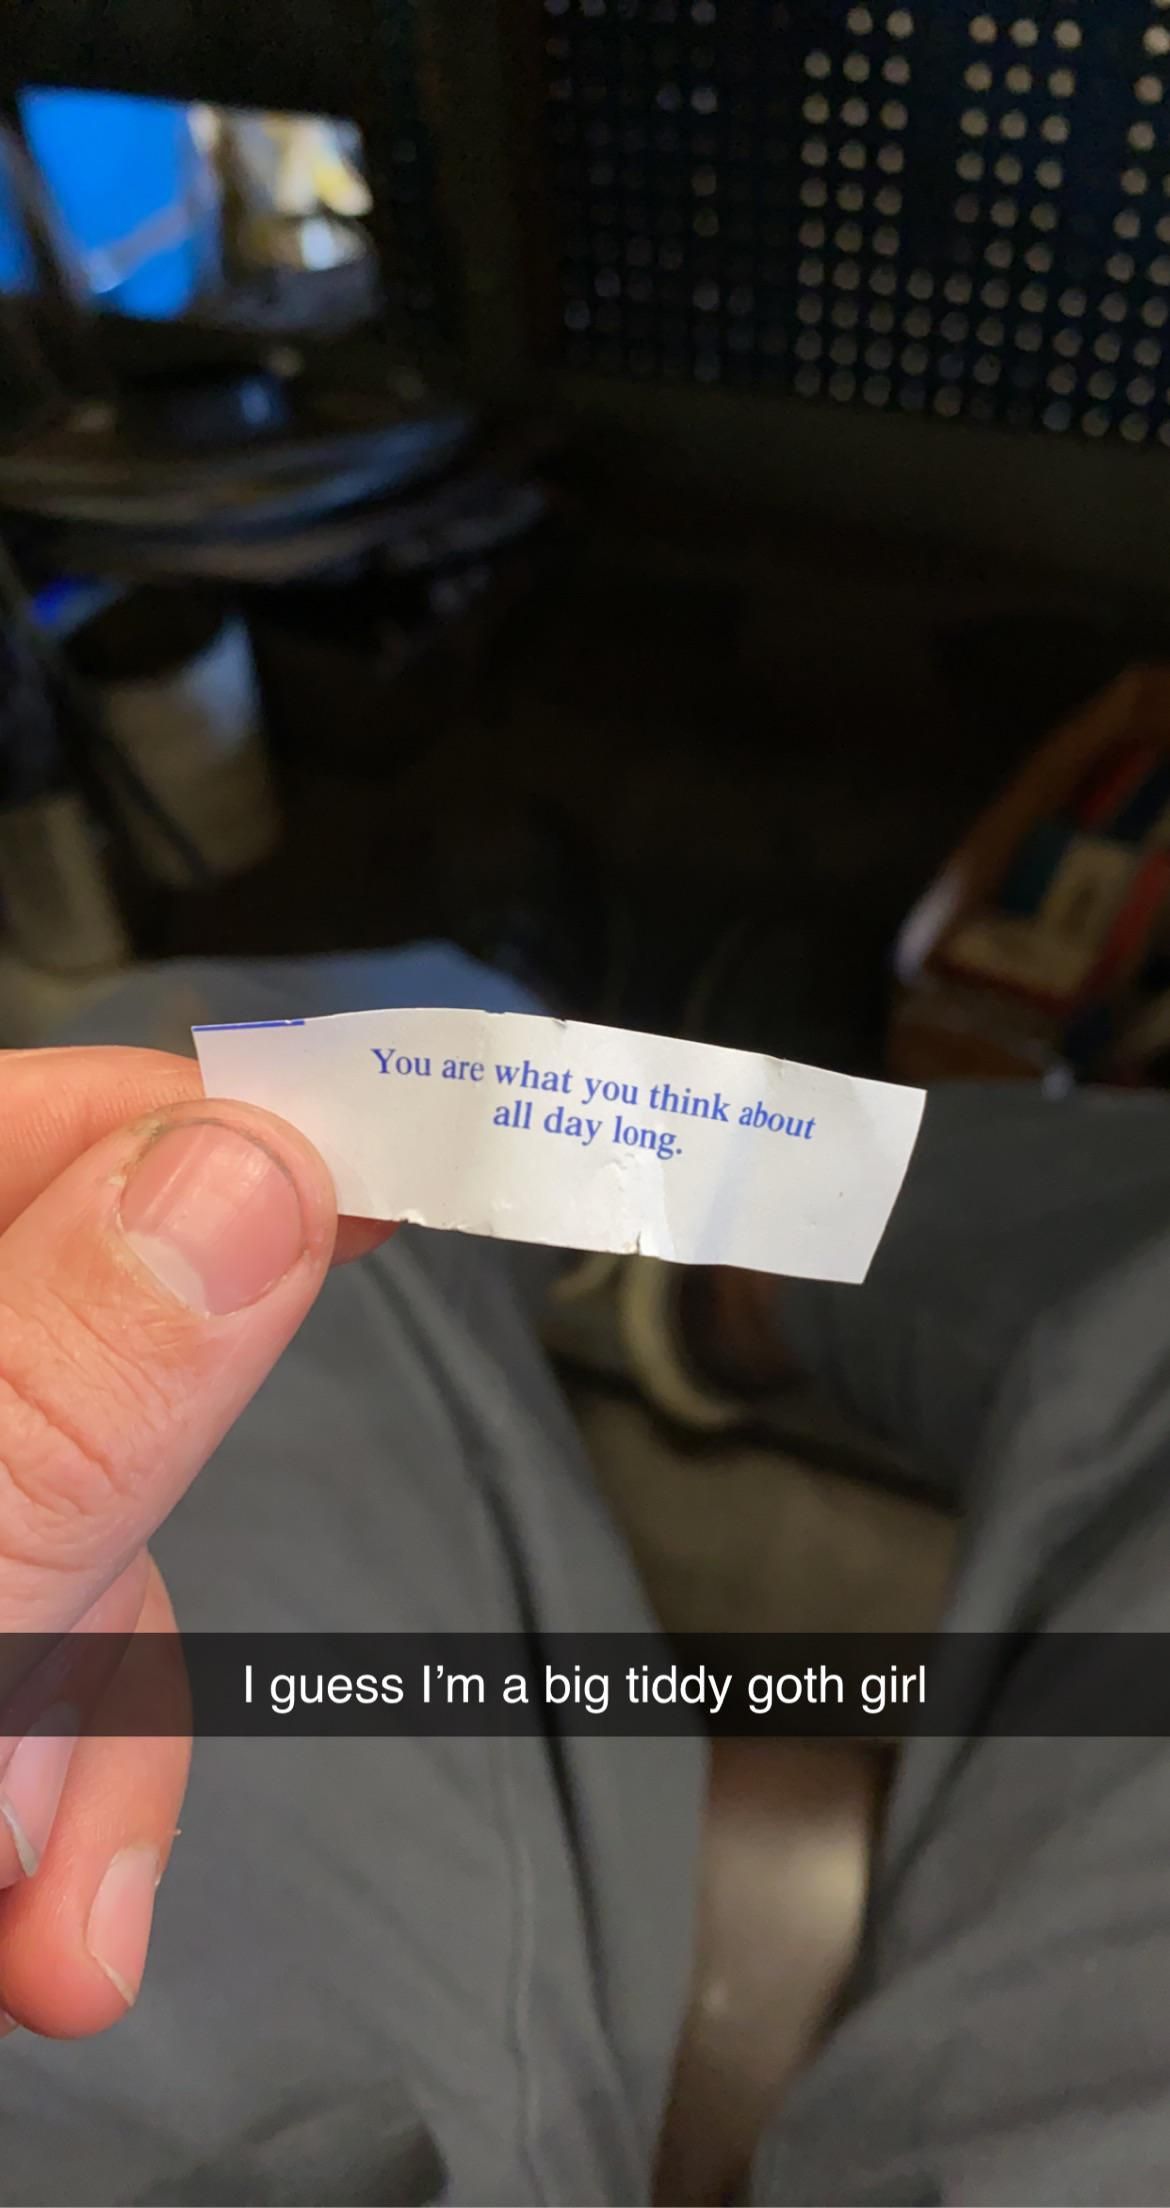 Finally a good fortune